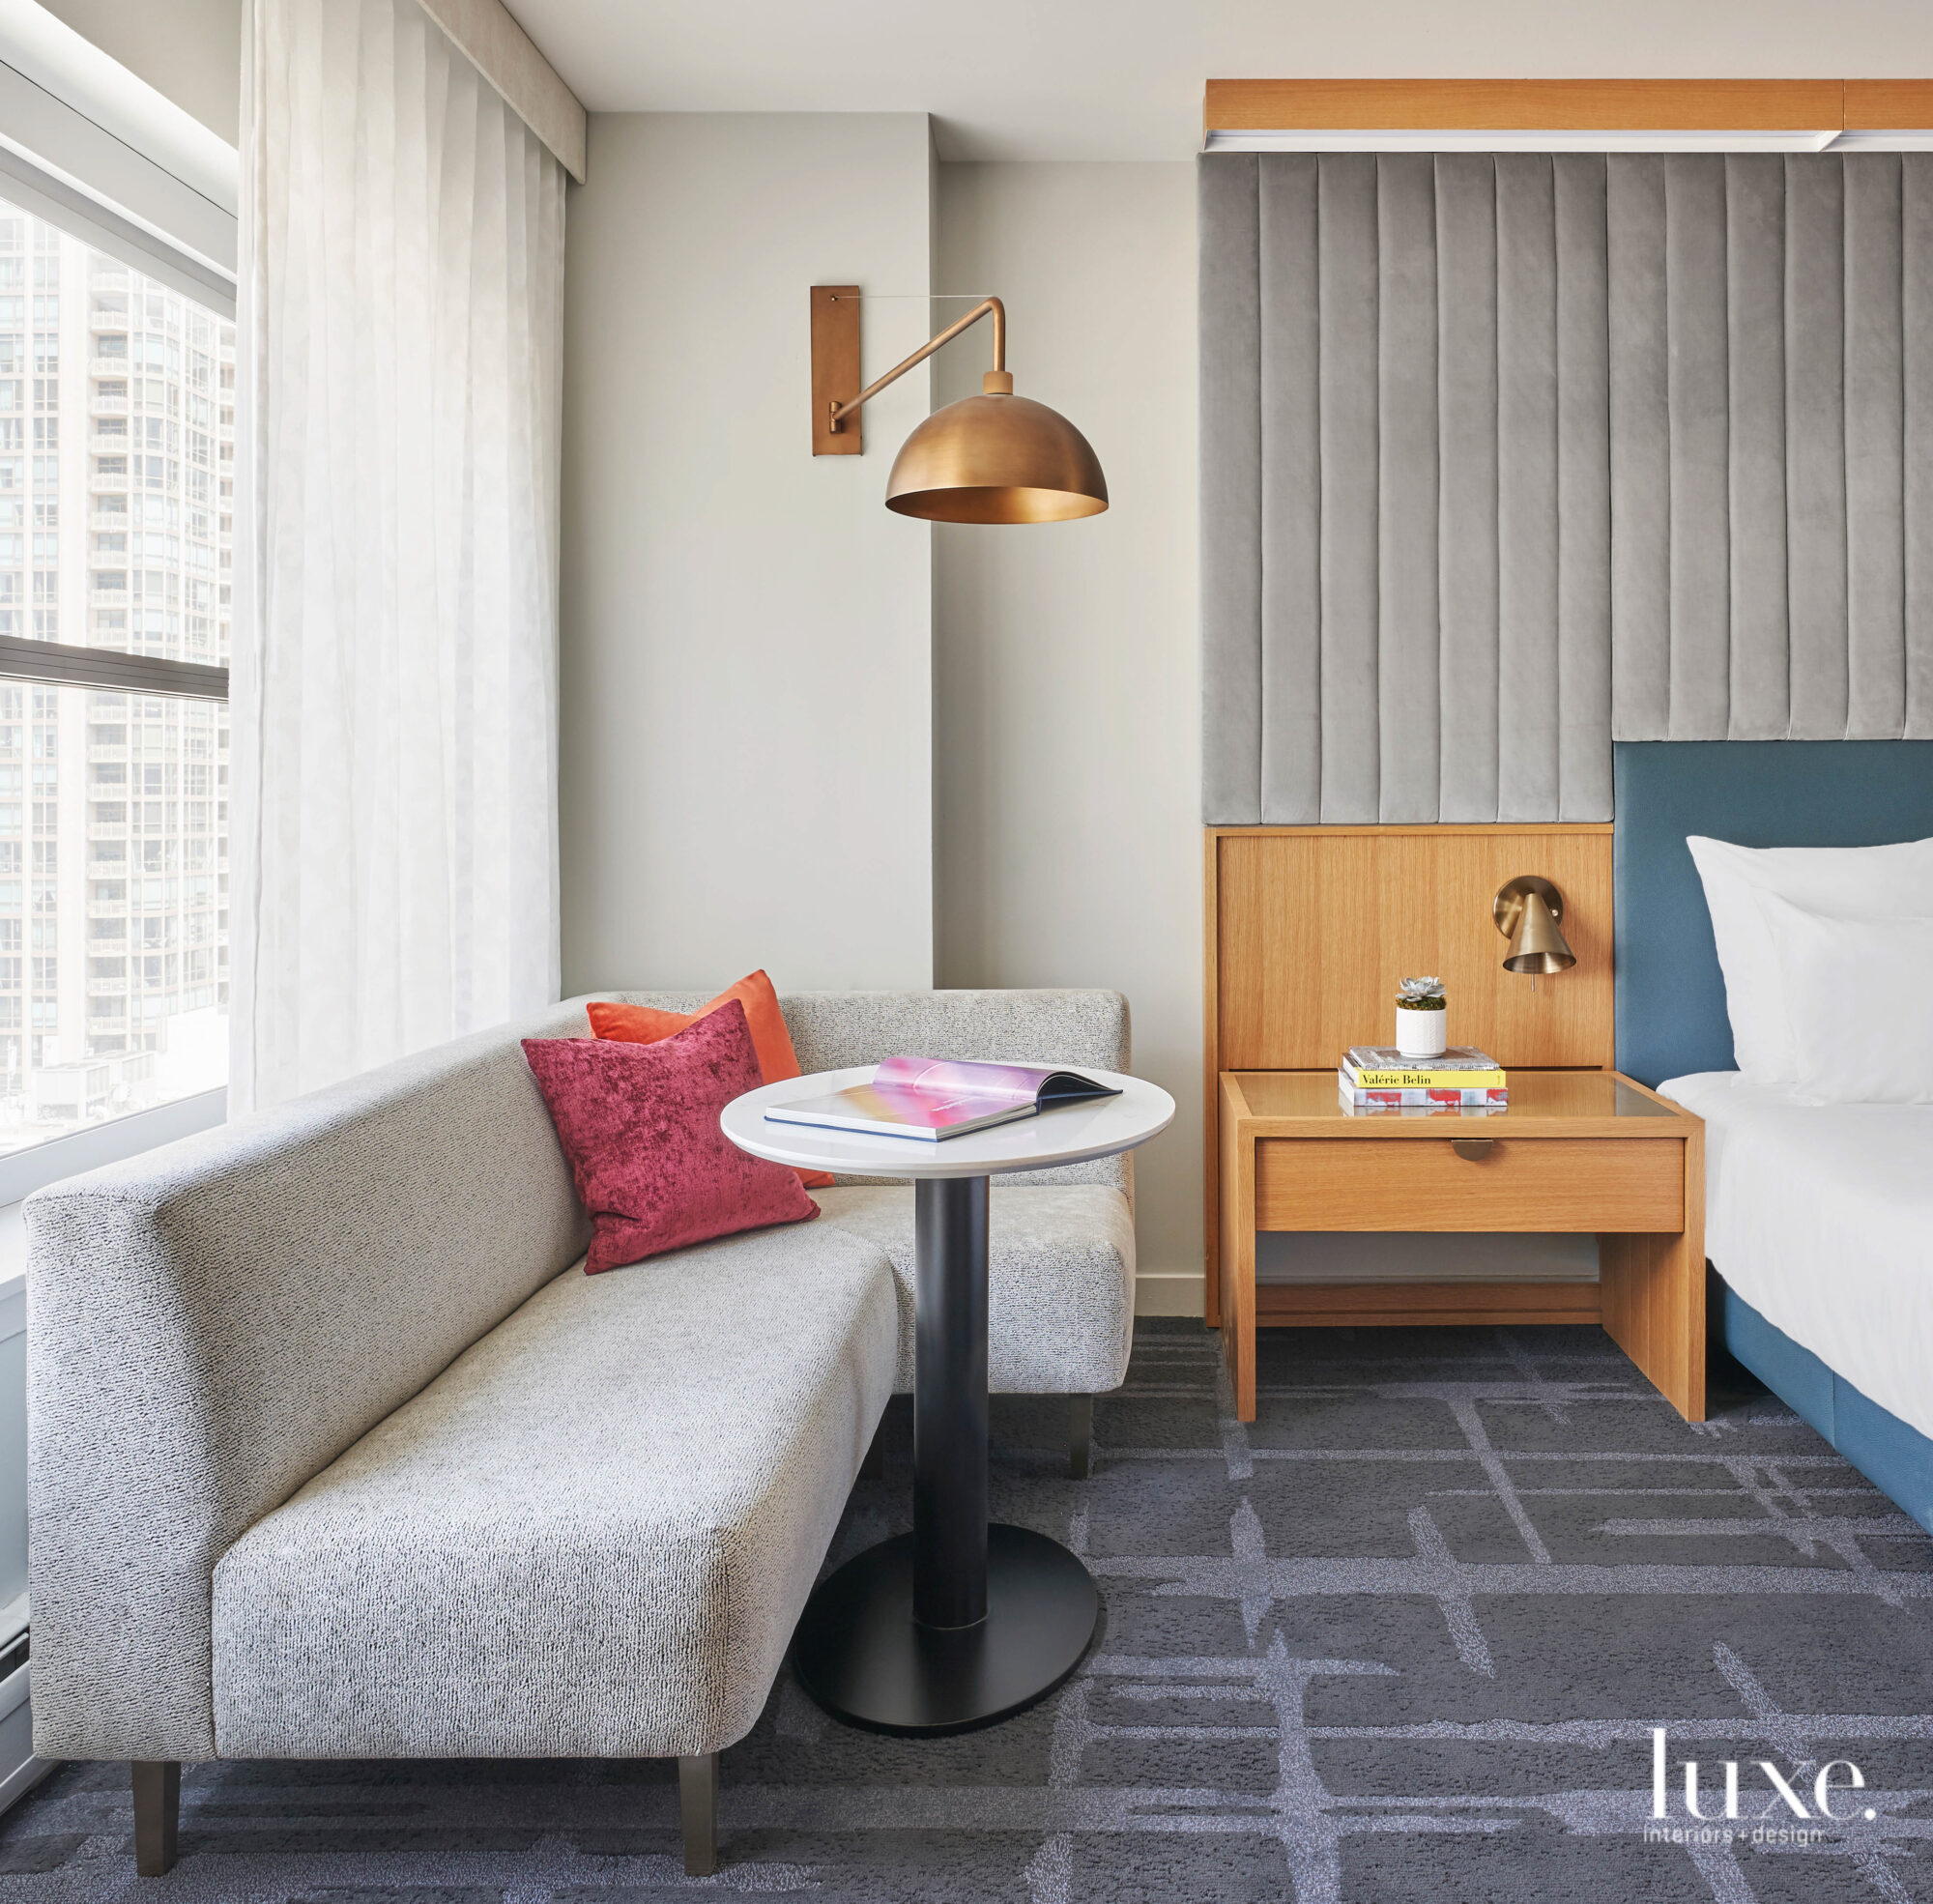 Colorful pillows, golden light fixtures and a blue bed frame make this bright hotel space pop. 